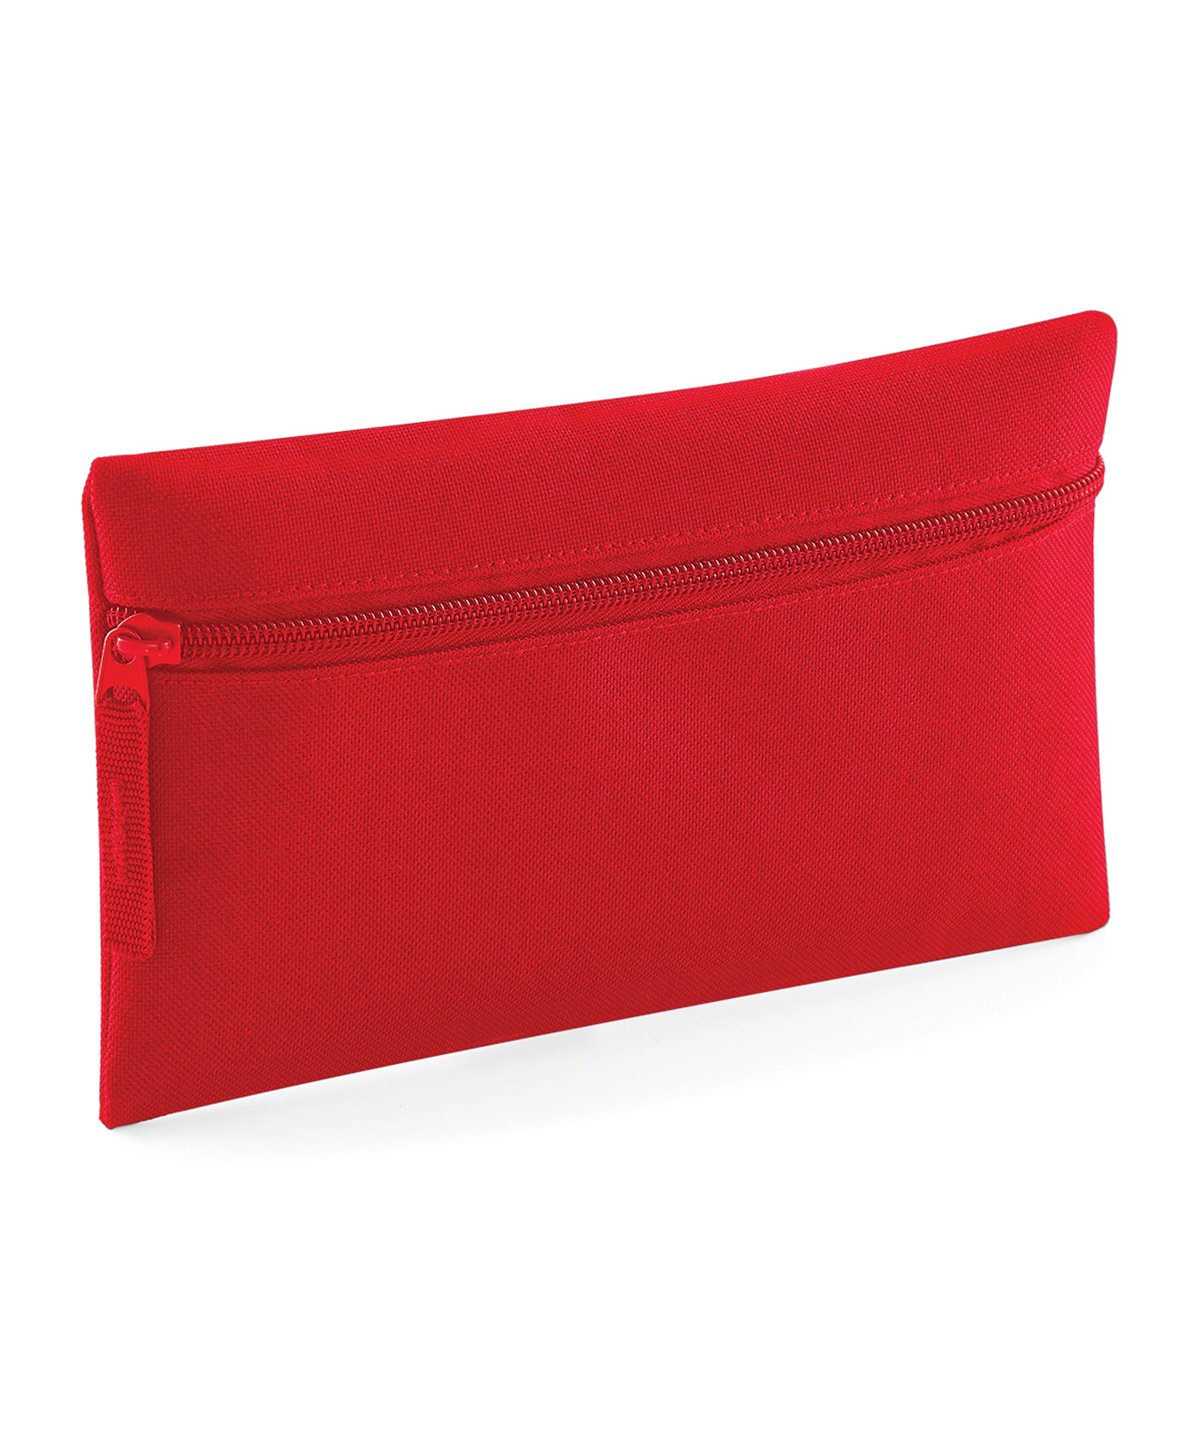 Pencil Case Classic Red Size One Size